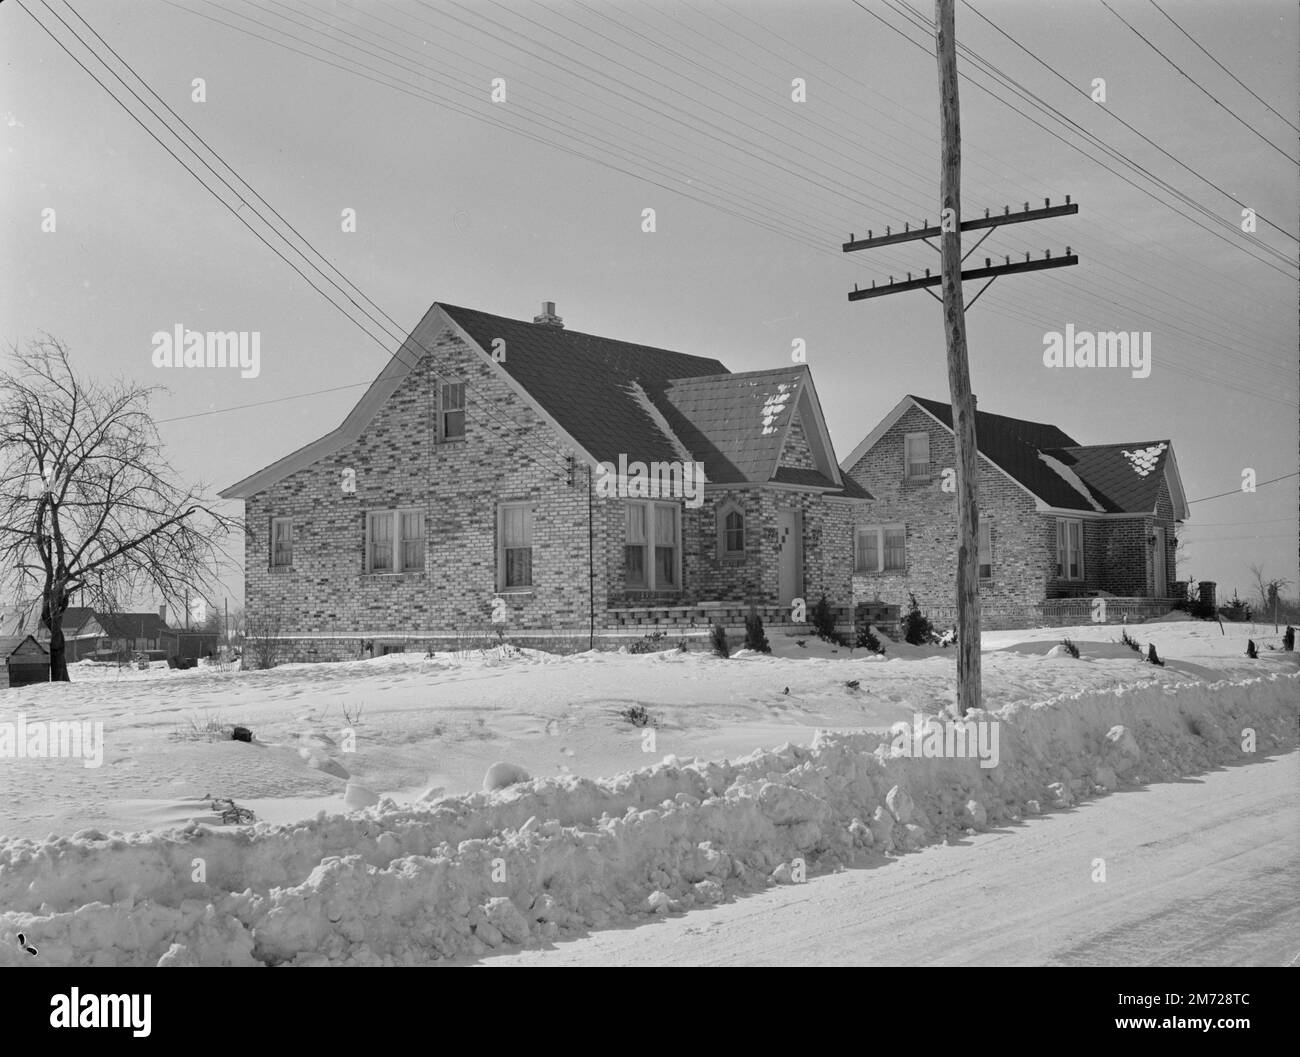 Shabby brick houses typical of Franklin Township near Bound Brook, New Jersey. Historic image. Mydans, Carl, photographer. Circa 1936. Stock Photo